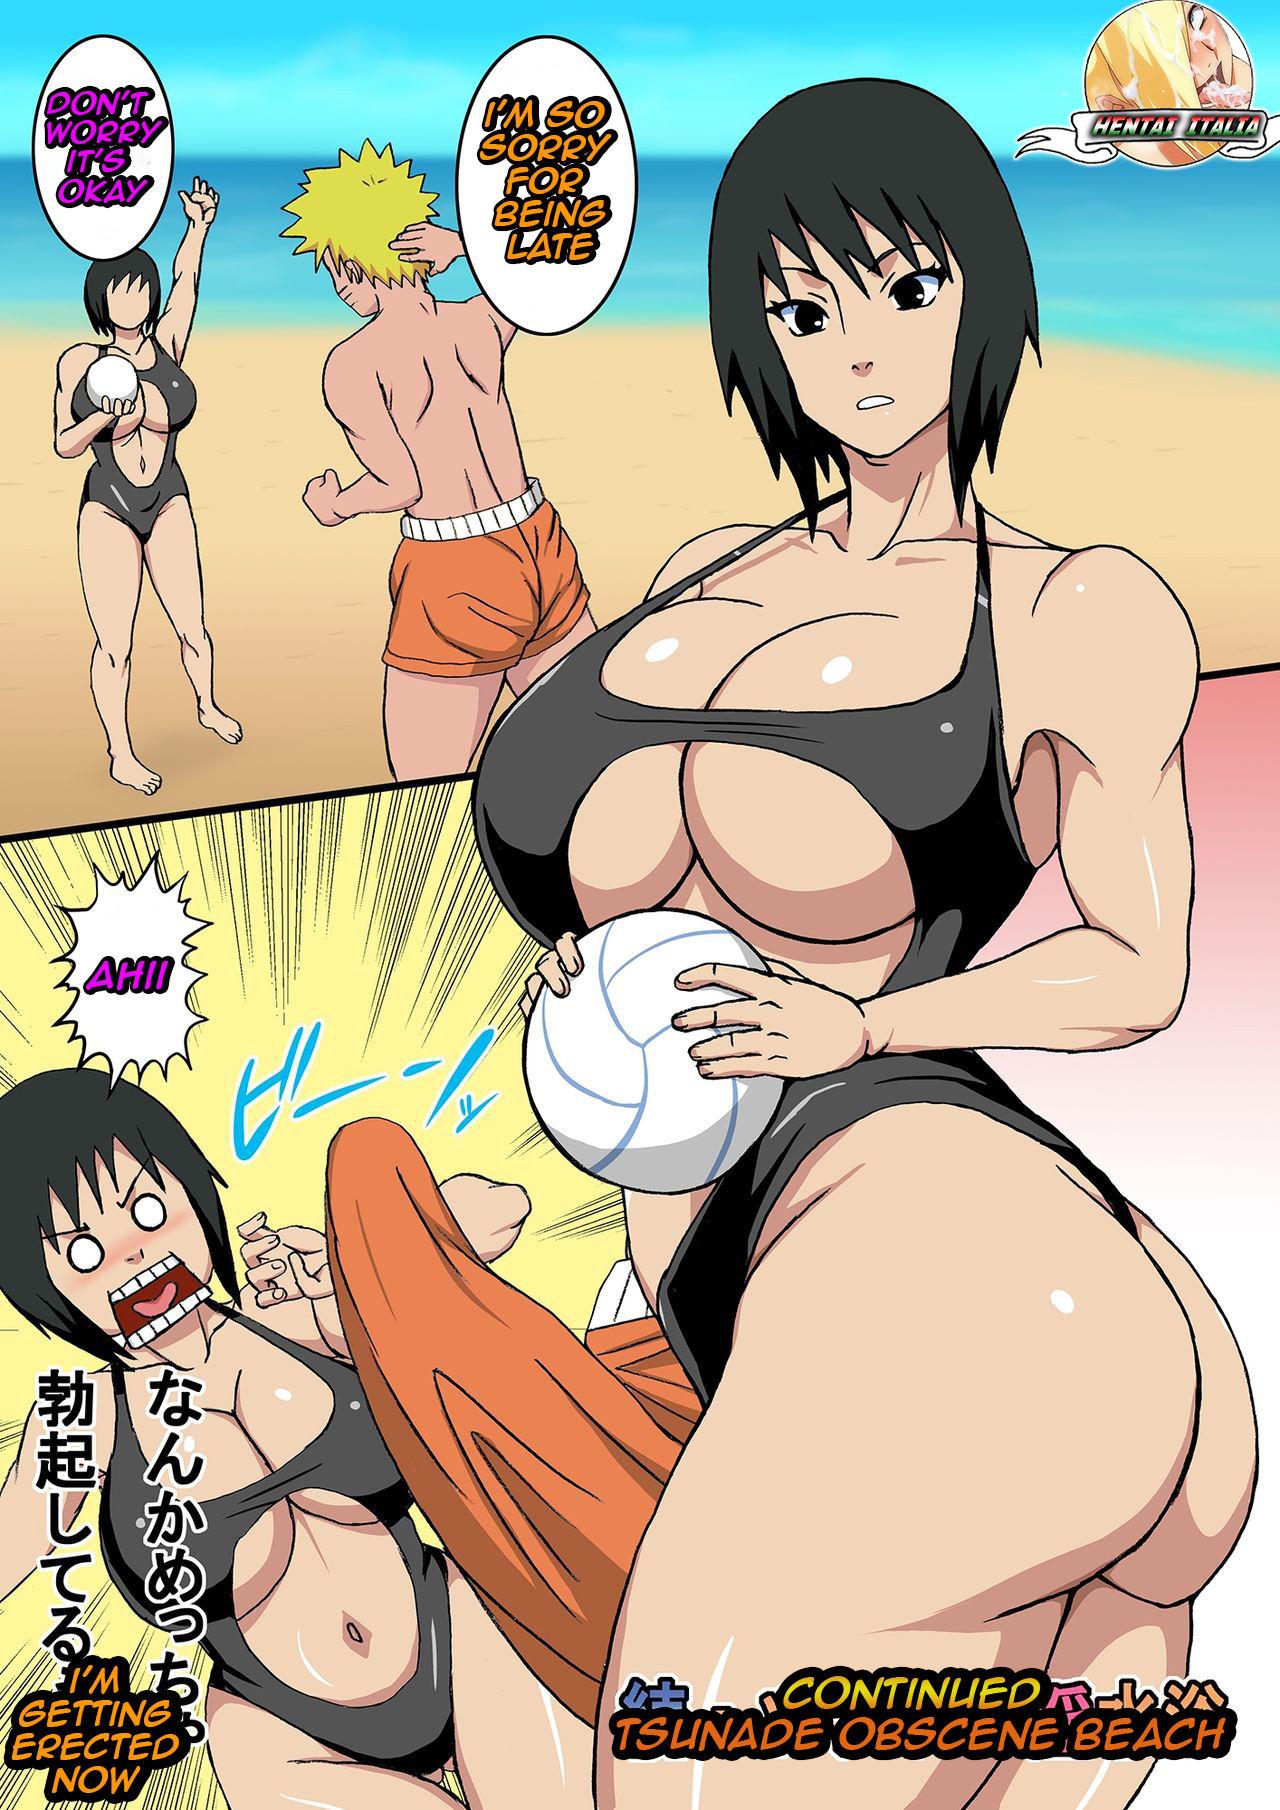 Homemade After Tsunade's Obscene Beach - Naruto Gay Trimmed - Page 3